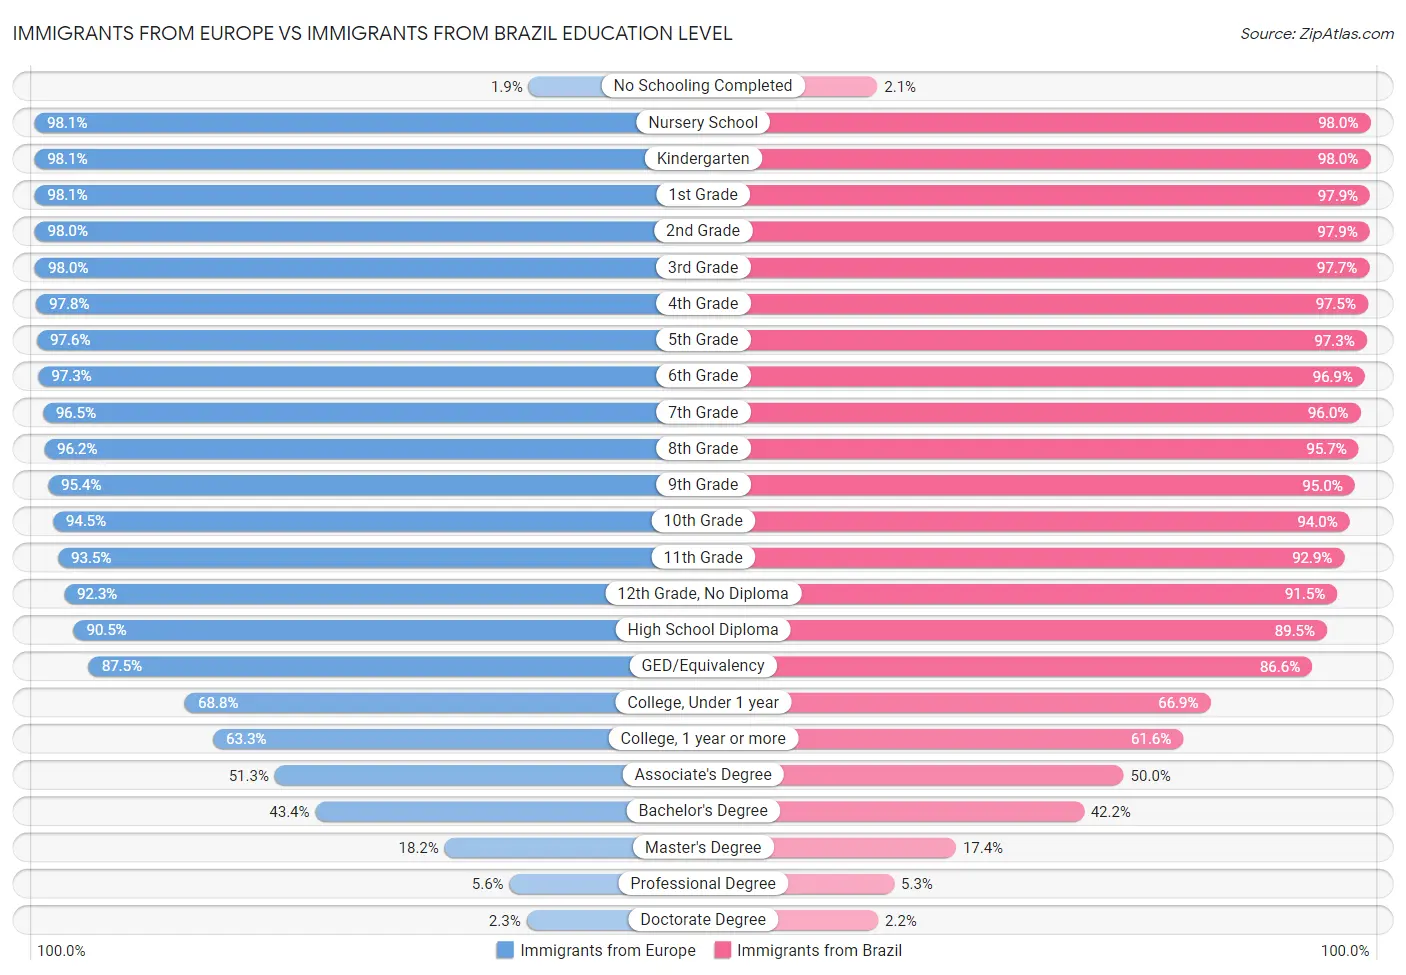 Immigrants from Europe vs Immigrants from Brazil Education Level